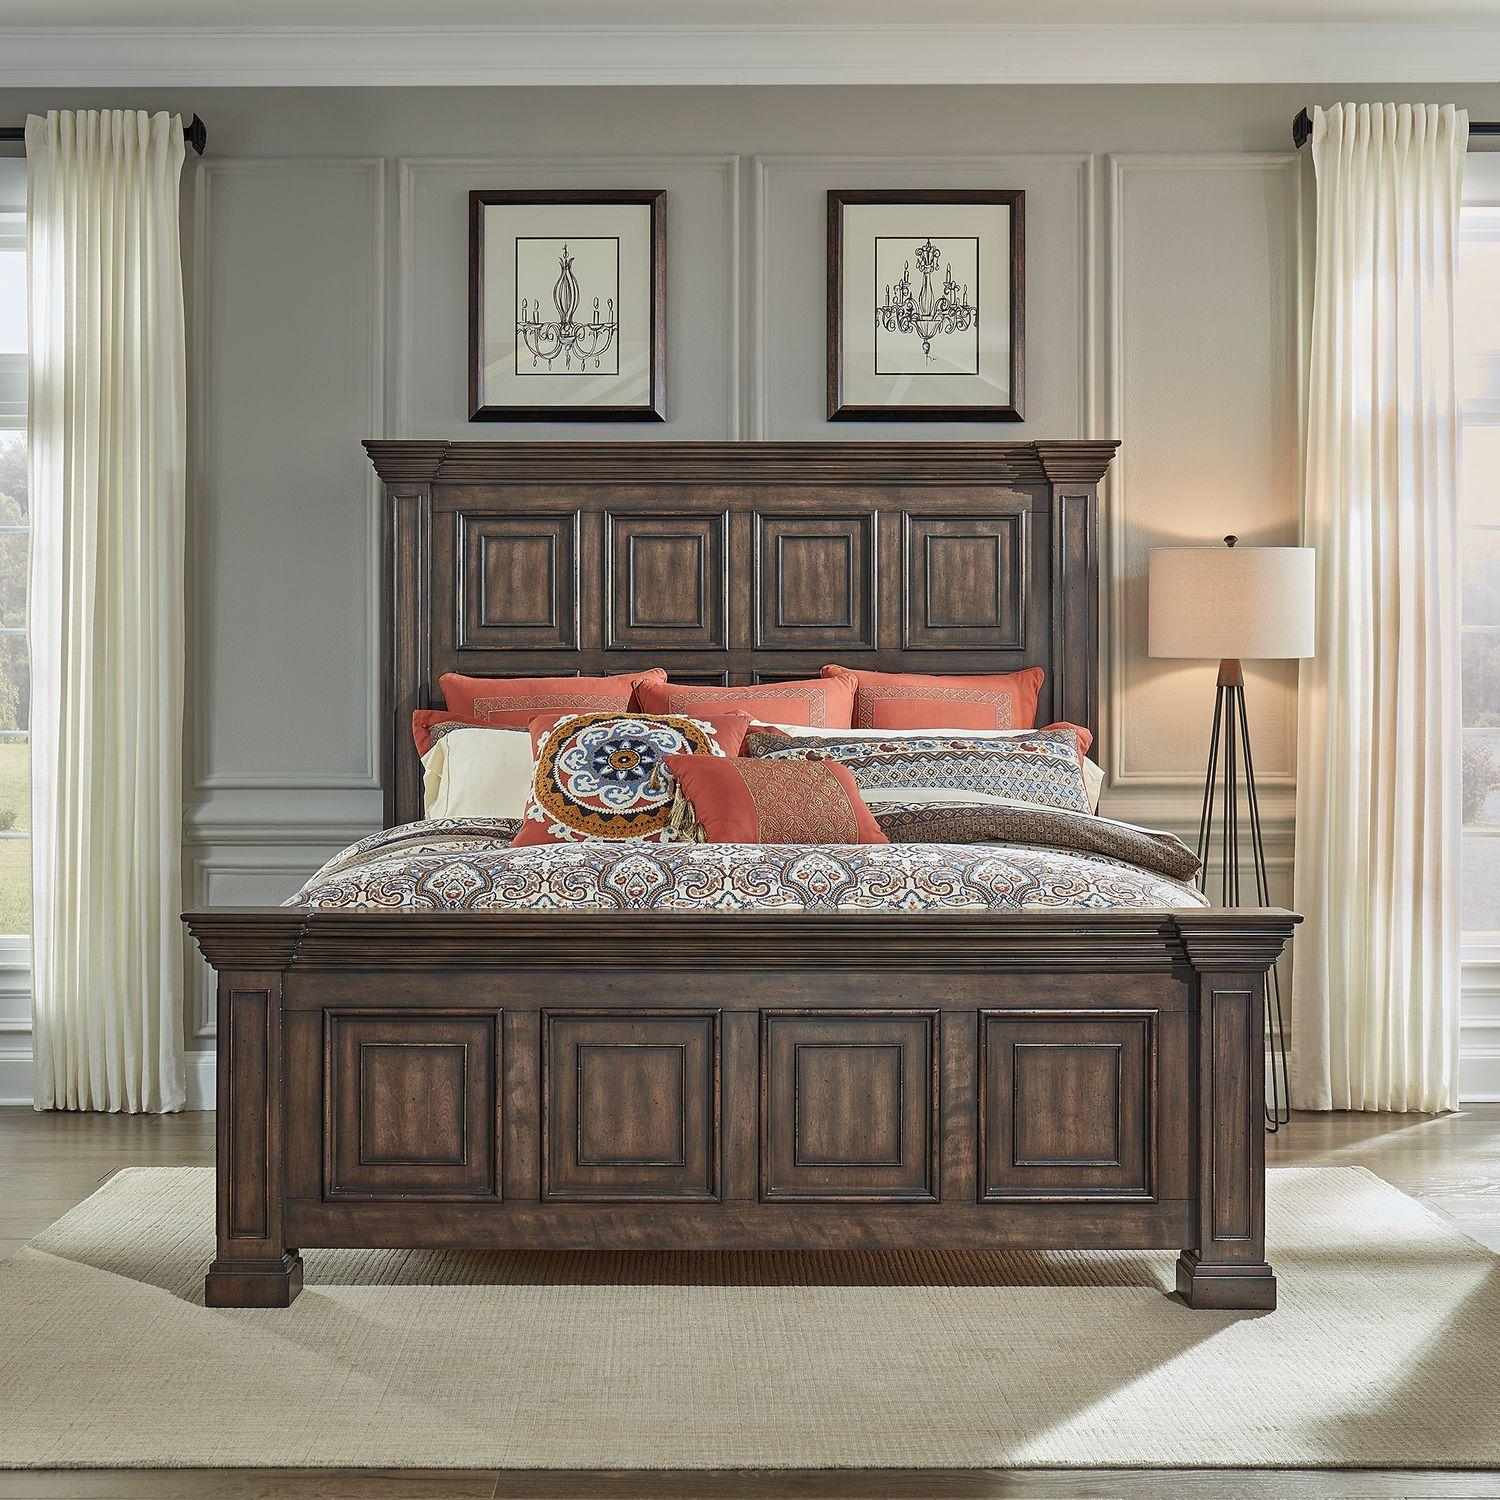 Transitional Panel Bed Big Valley (361-BR) 361-BR-KPB in Brown 